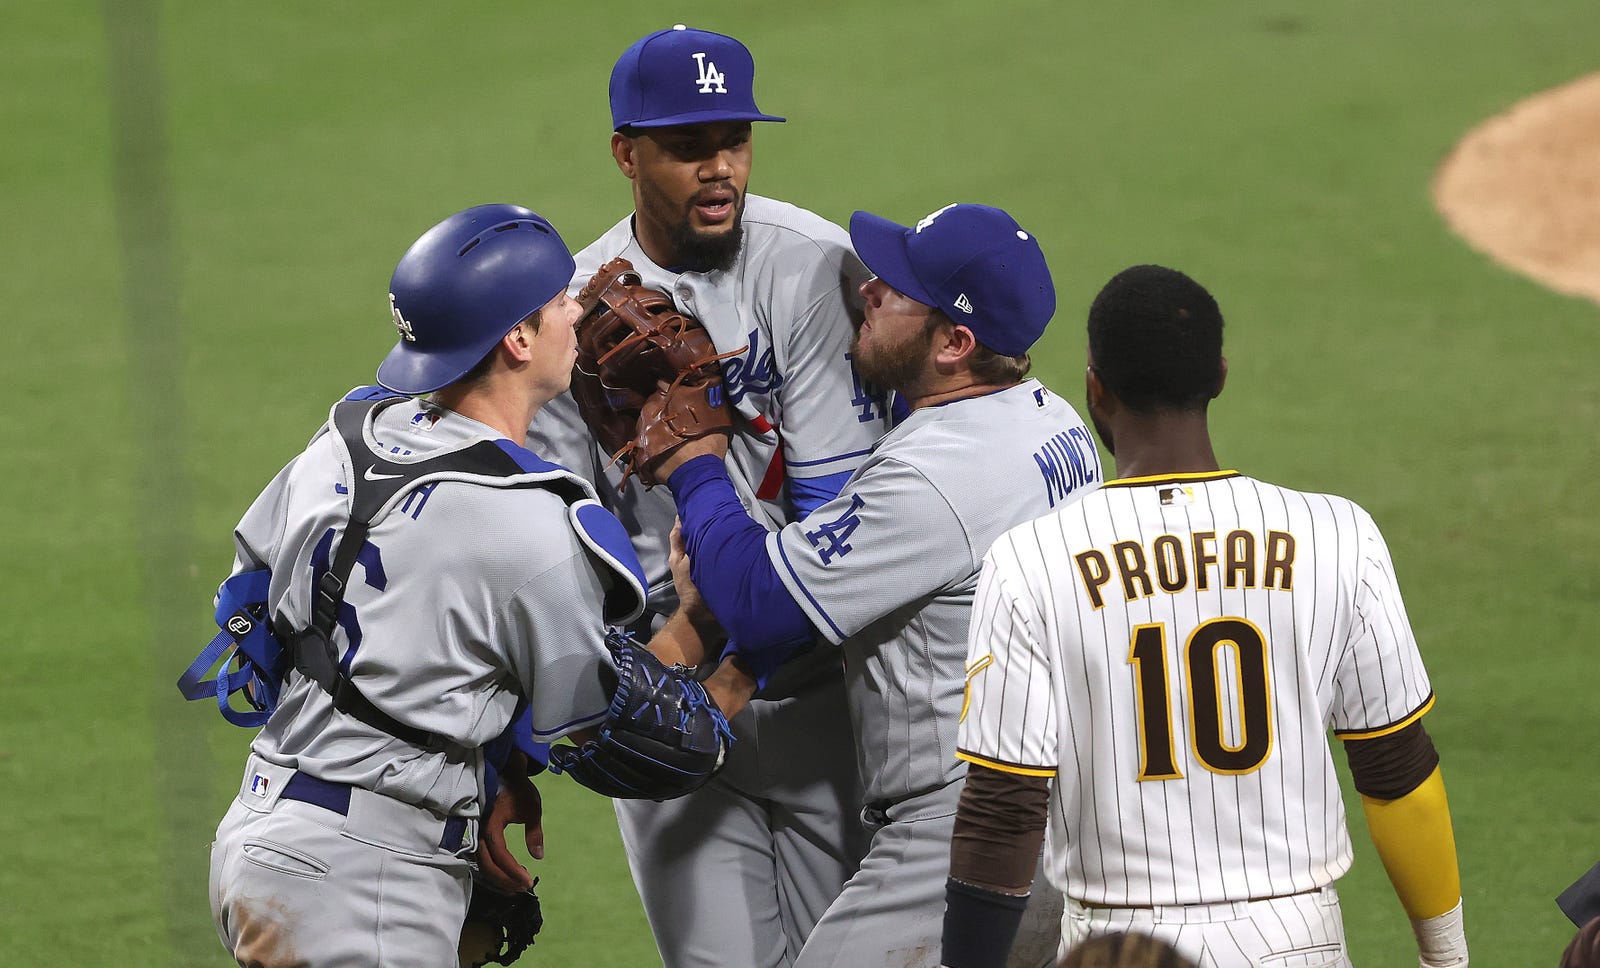 Padres hold off Dodgers 3-2 in resumption of SoCal rivalry